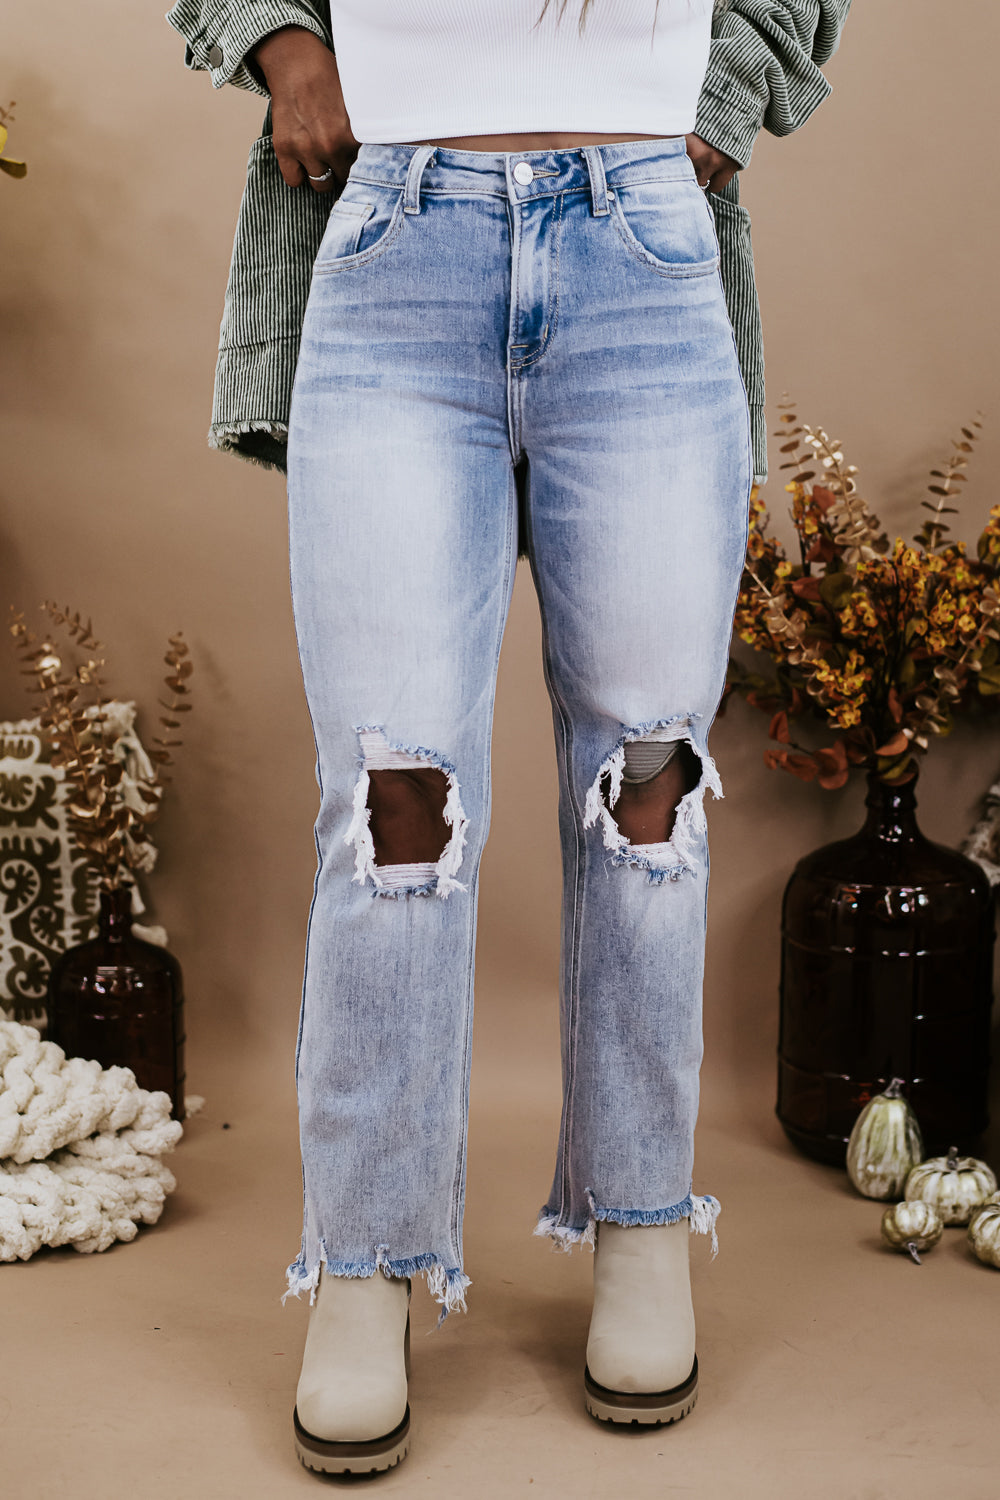 Styling Mom Jeans for Fall - A Good Hue